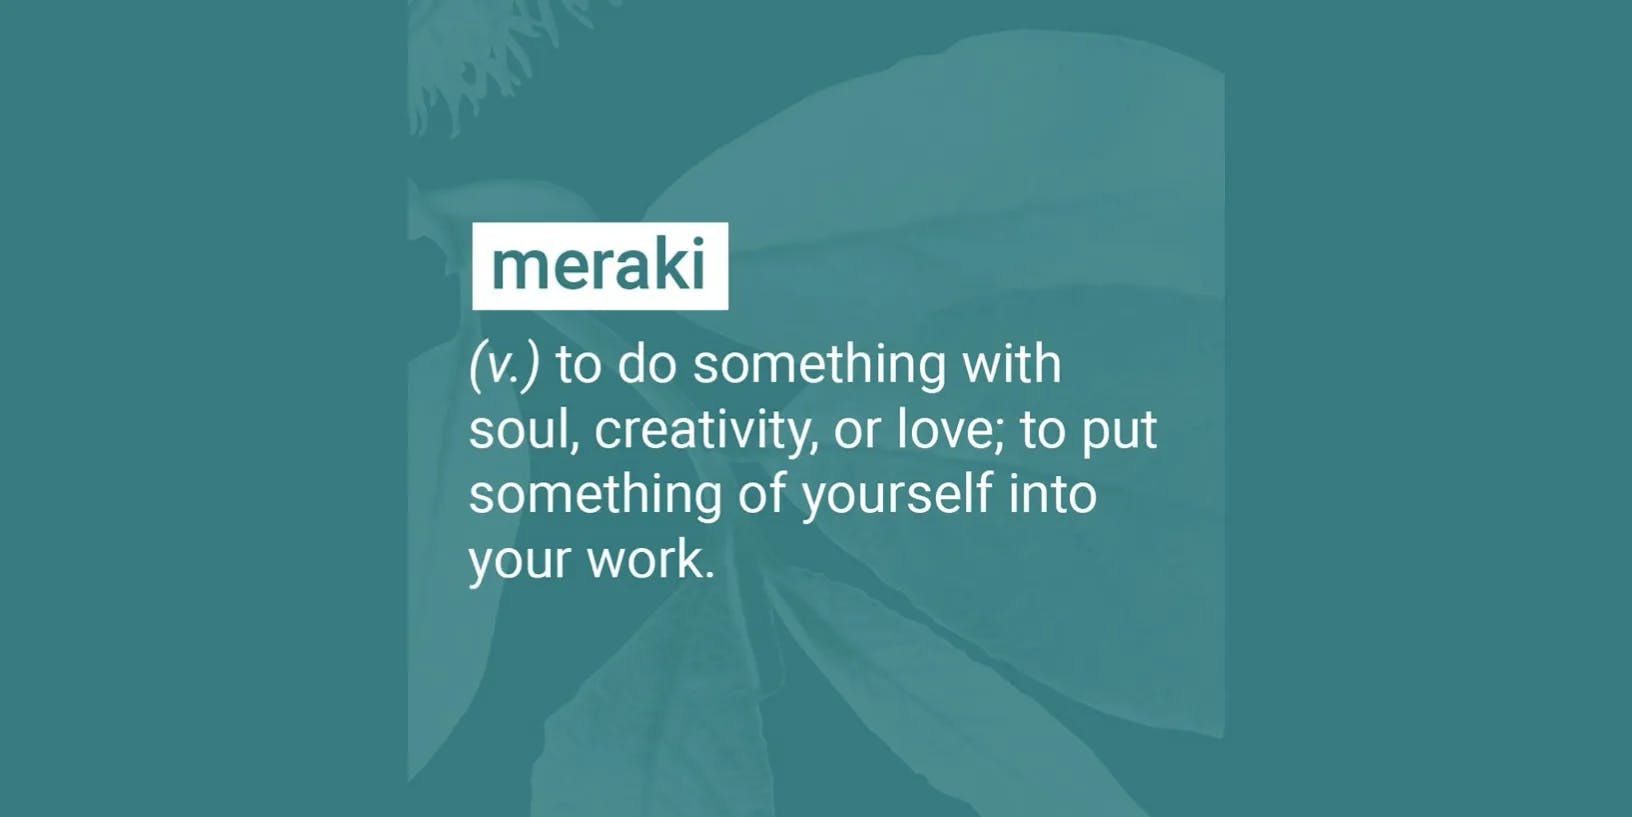 Meraki: to do something with soul, creativity, or love; to put something of yourself into your work.